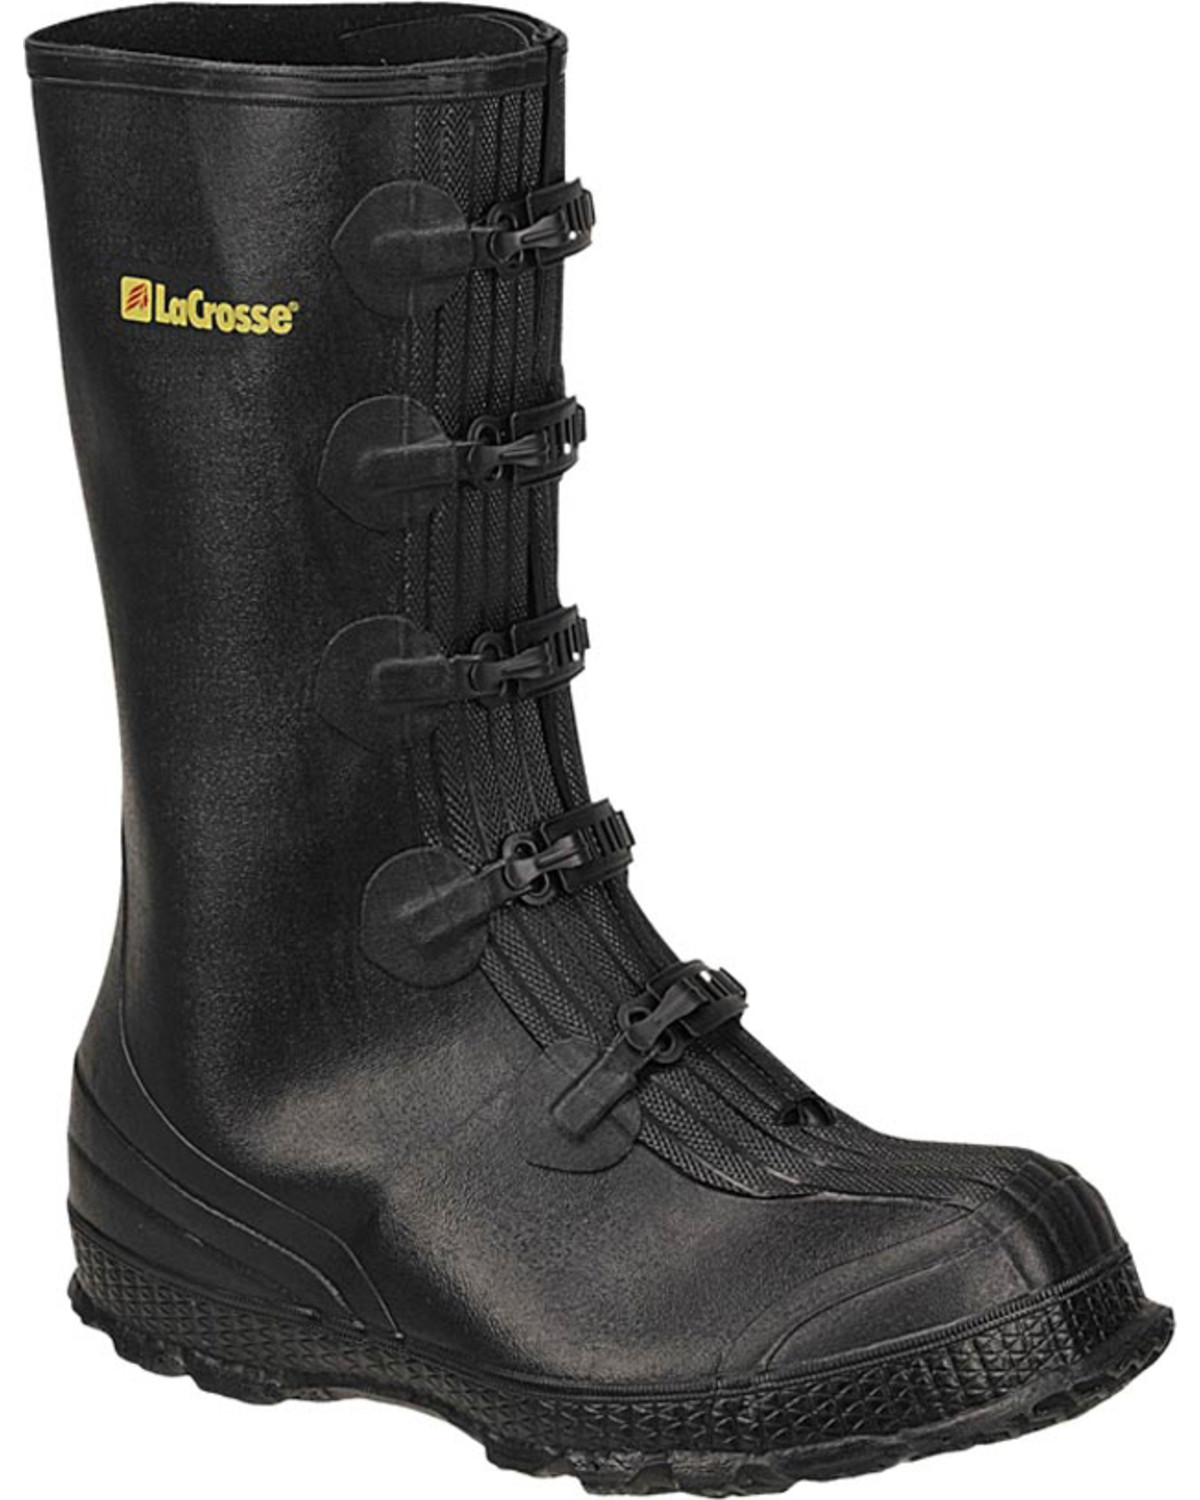 Z-Series Overshoe Rubber Boots | Boot Barn